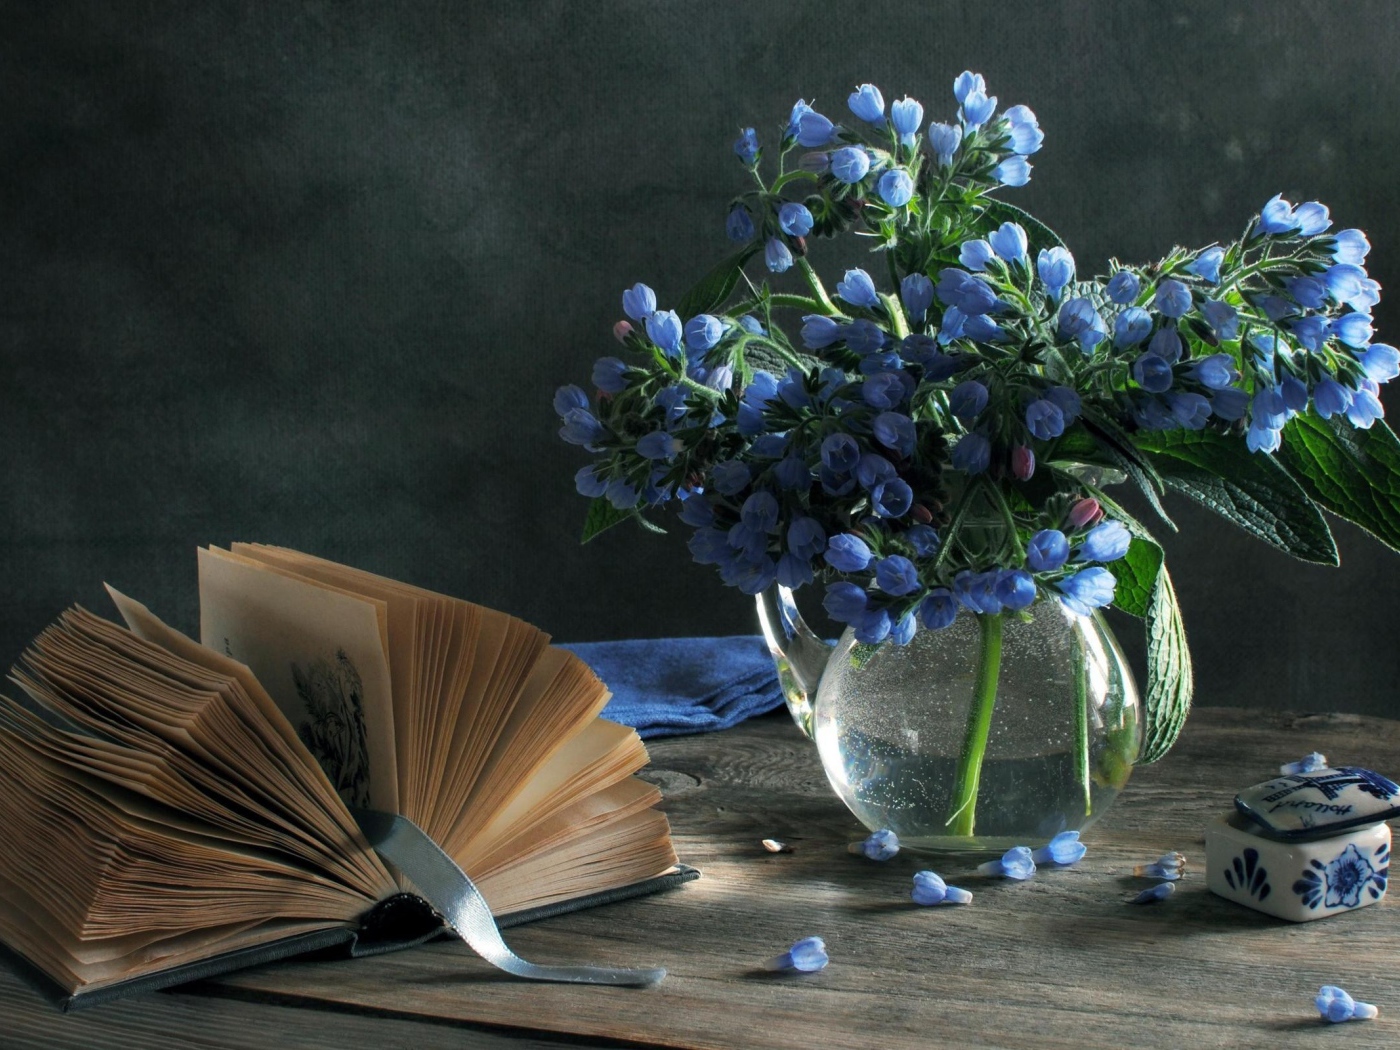 Blue flowers and a book